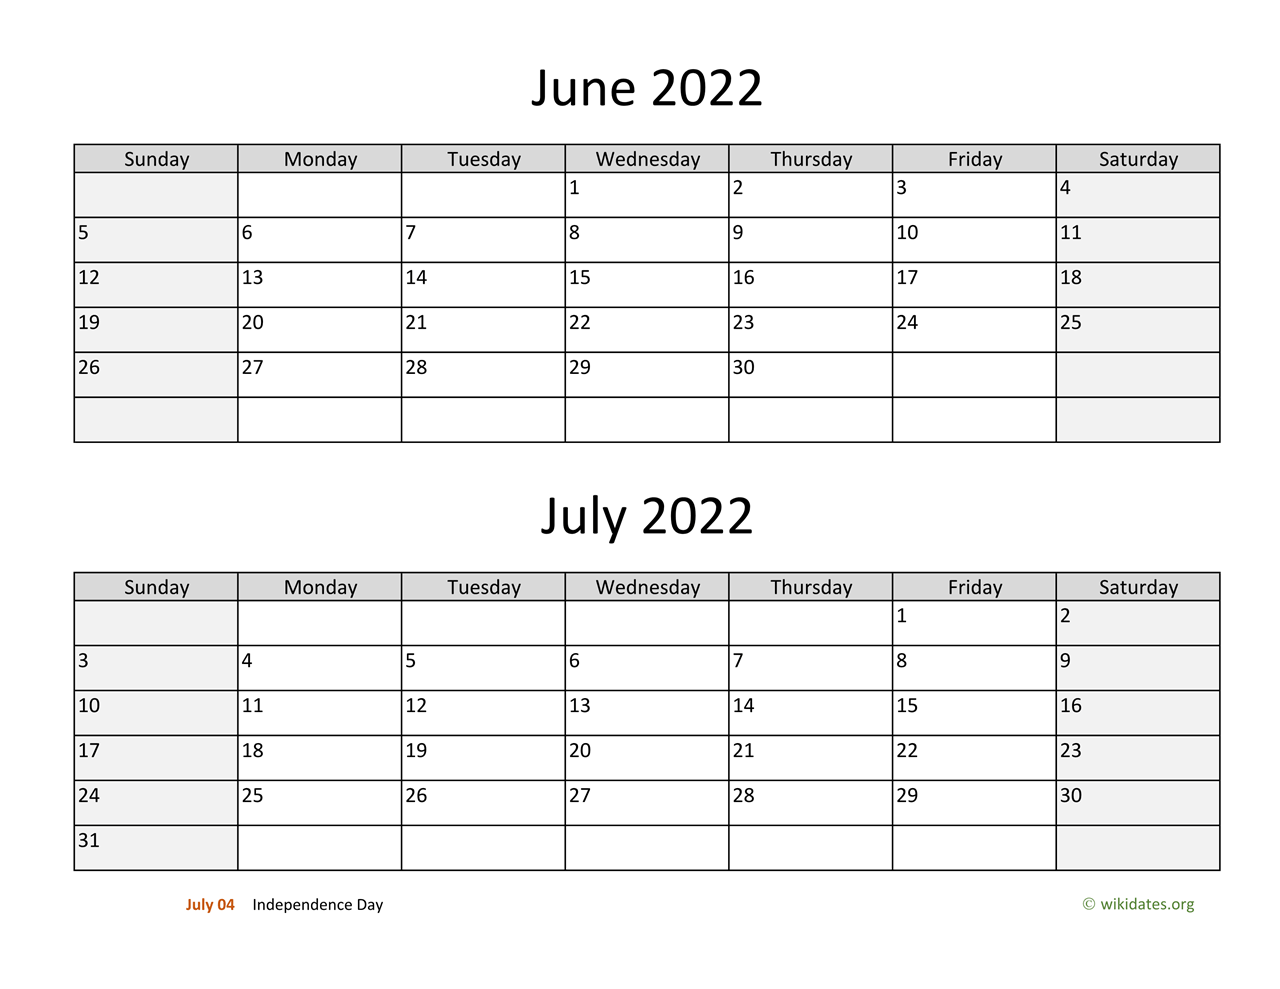 June July And August 2022 Calendar June And July 2022 Calendar | Wikidates.org